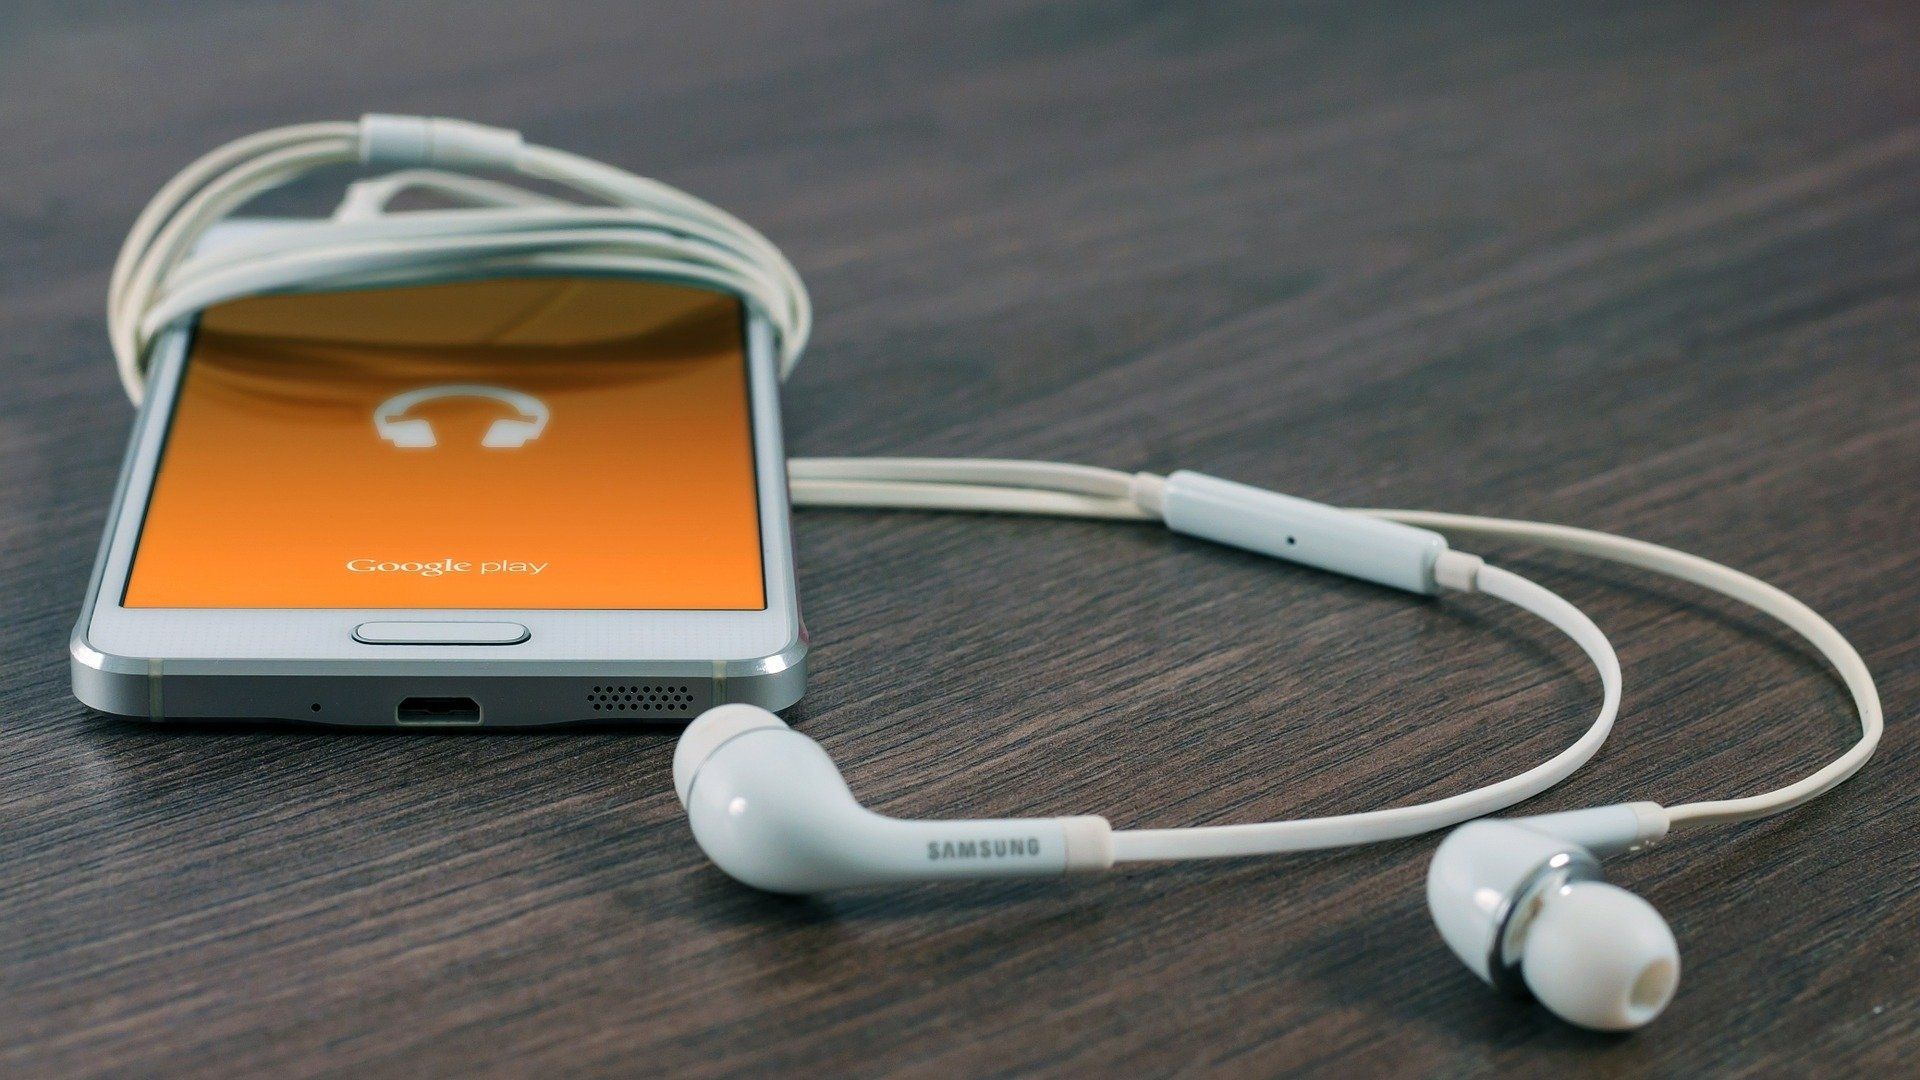 Google play music pulled up on a samsung smartphone with earbuds laying near it